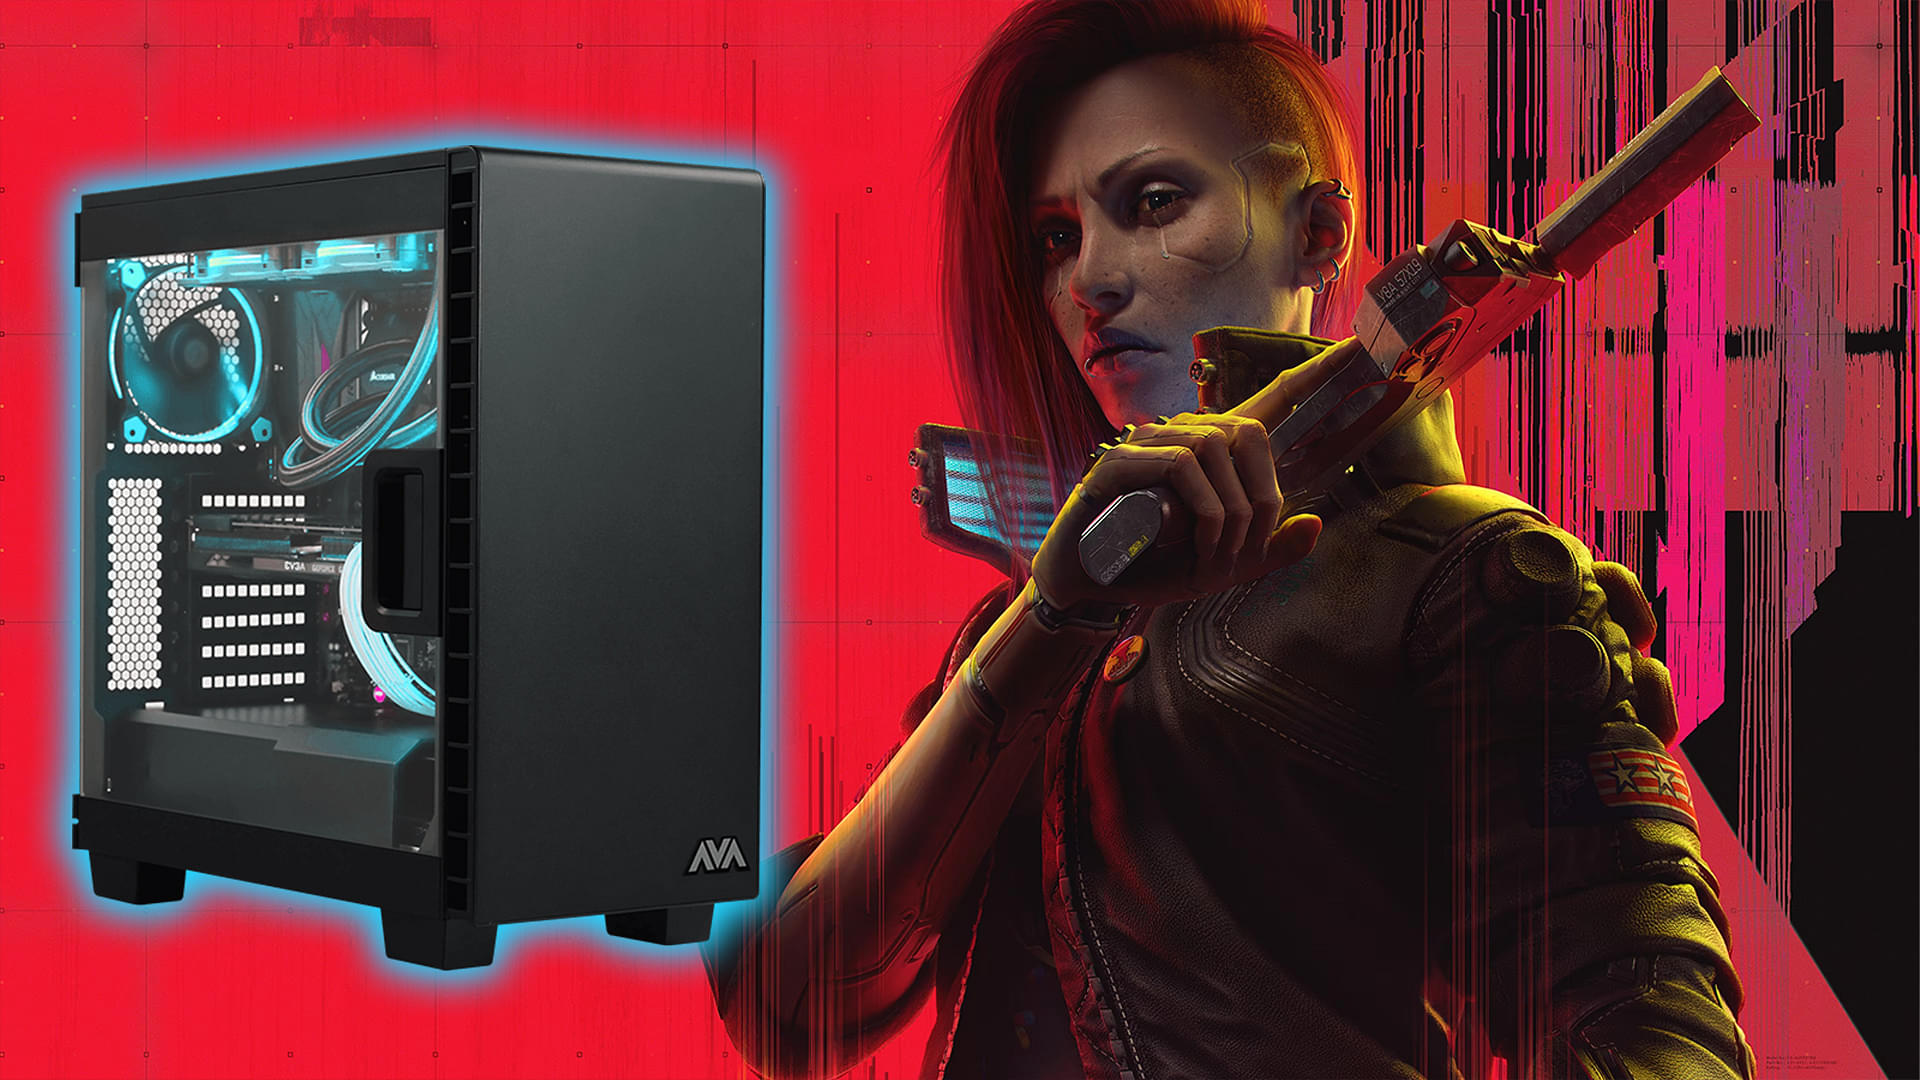 An image showing Gaming PC on right and V from Cyberpunk 2077 Phantom Liberty on right